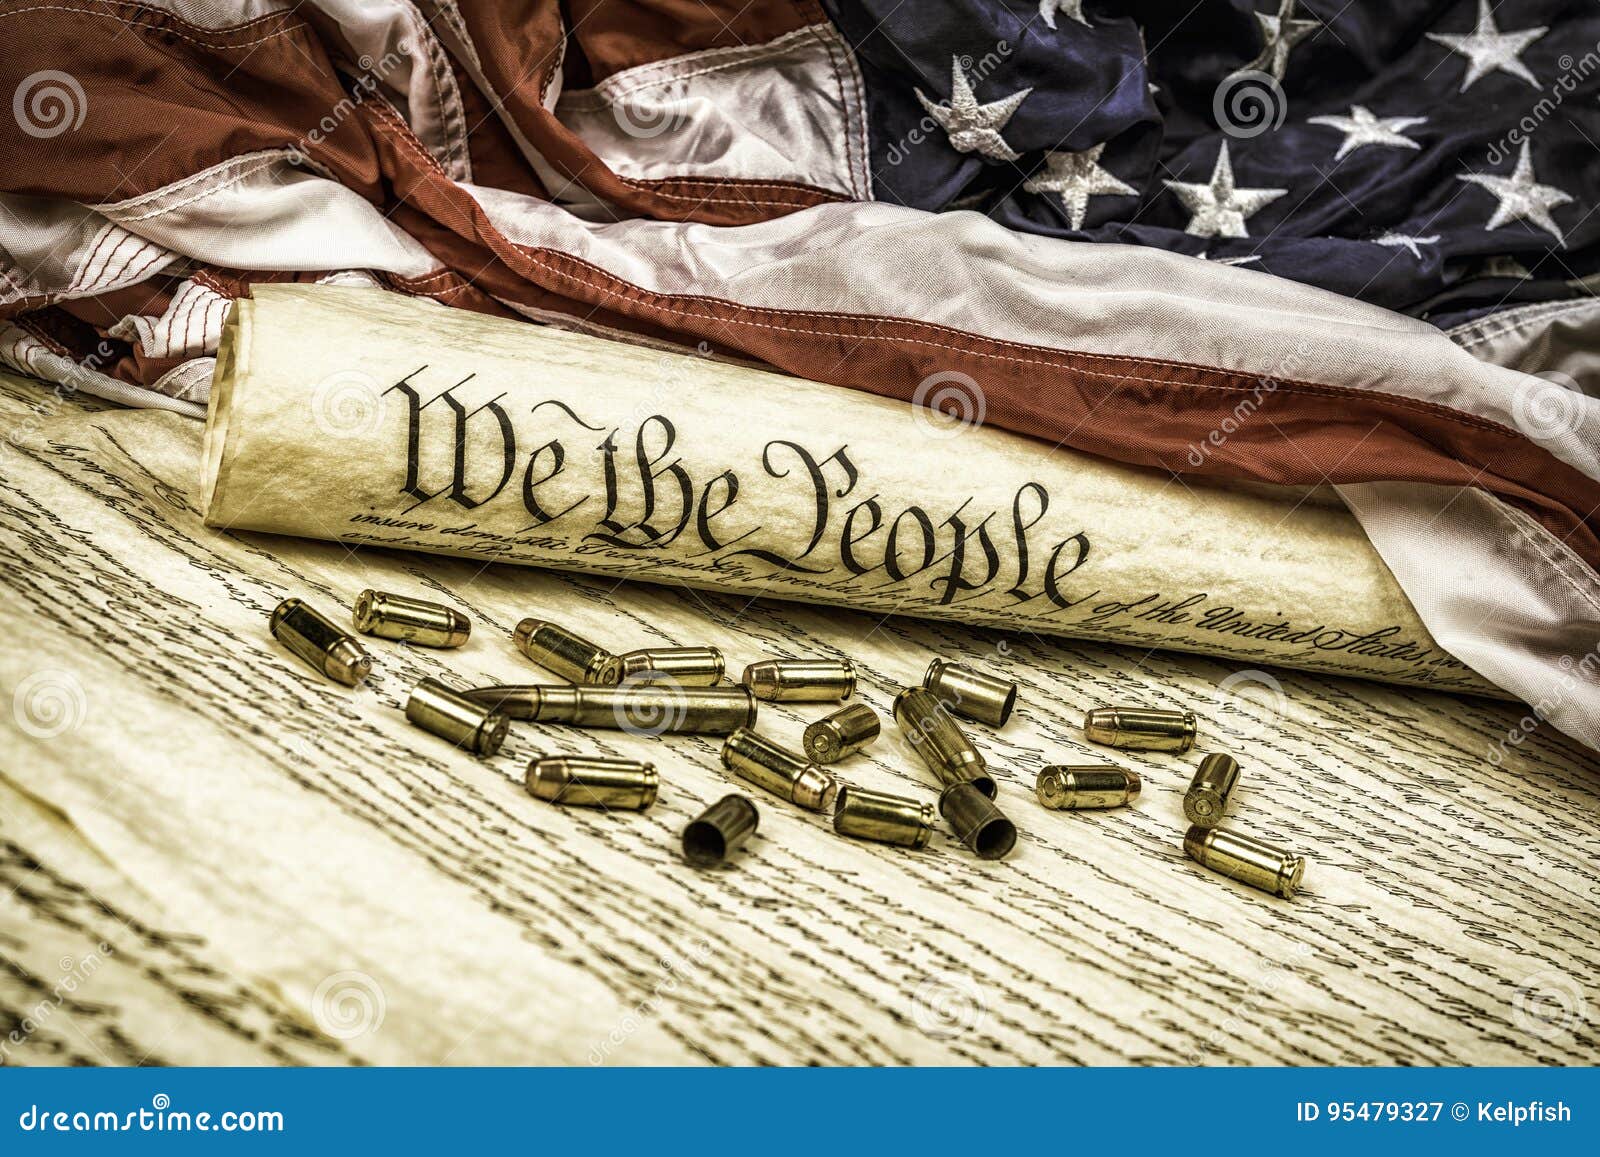 constitution and bullets